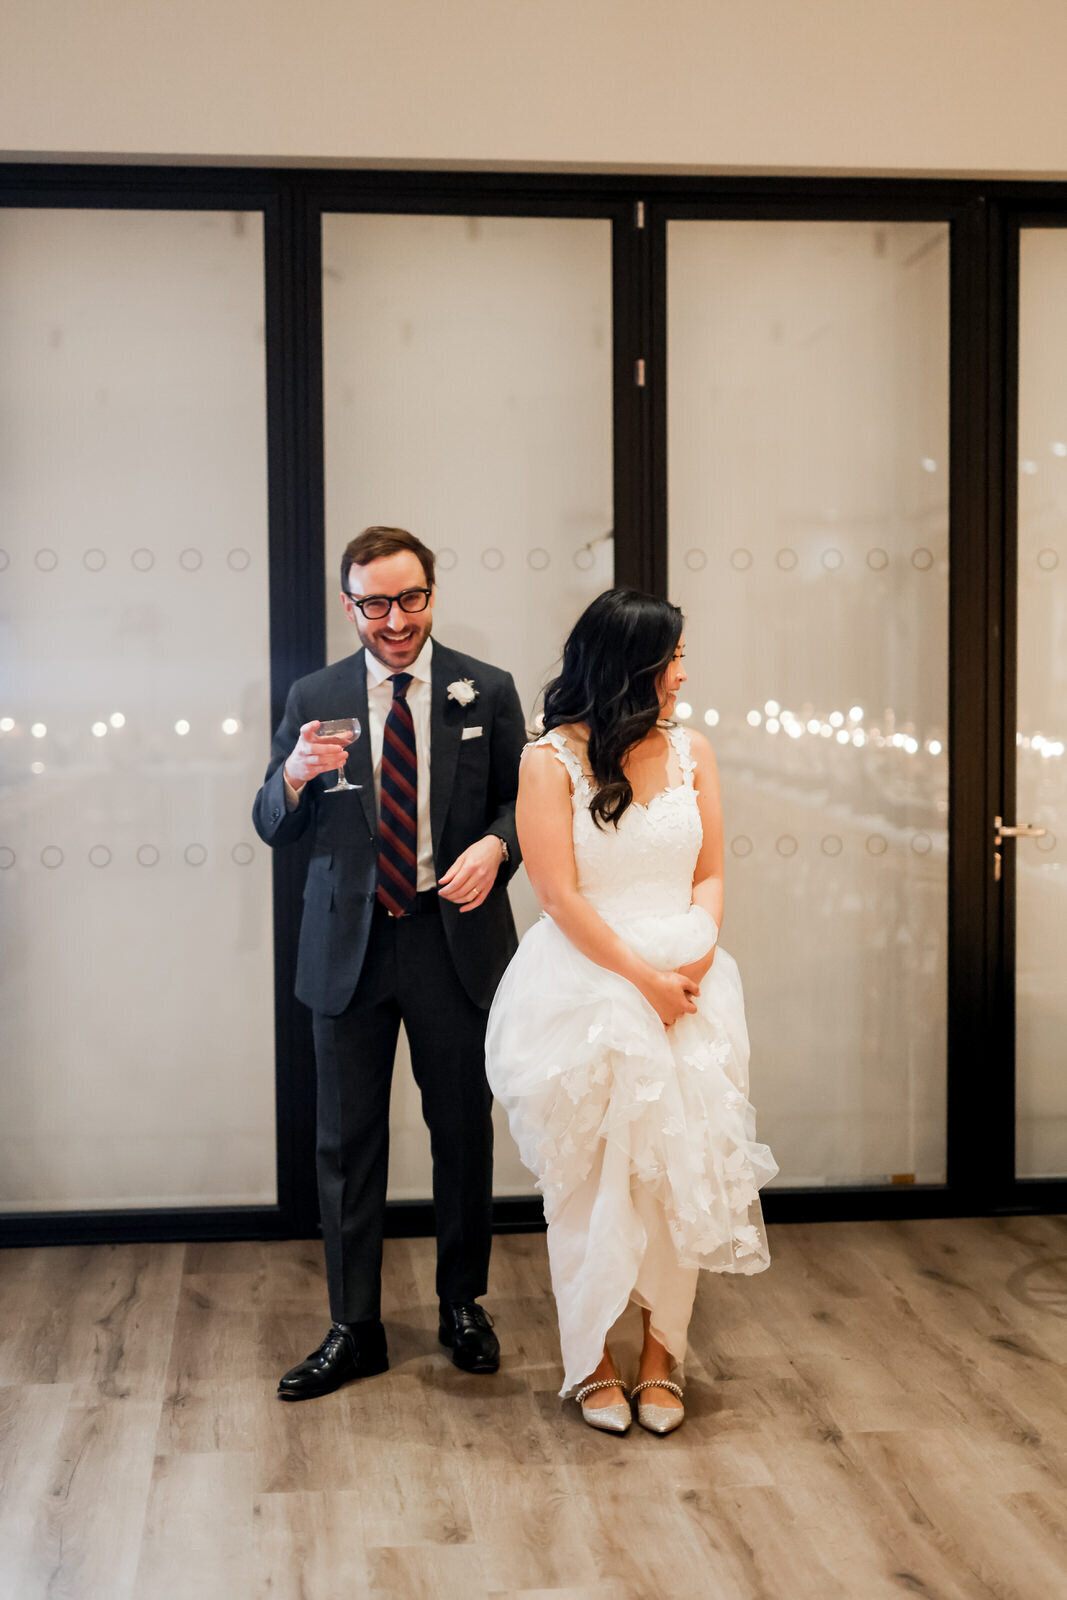 Creative Wedding Photography at The Riggs Hotel in Washington DC 53